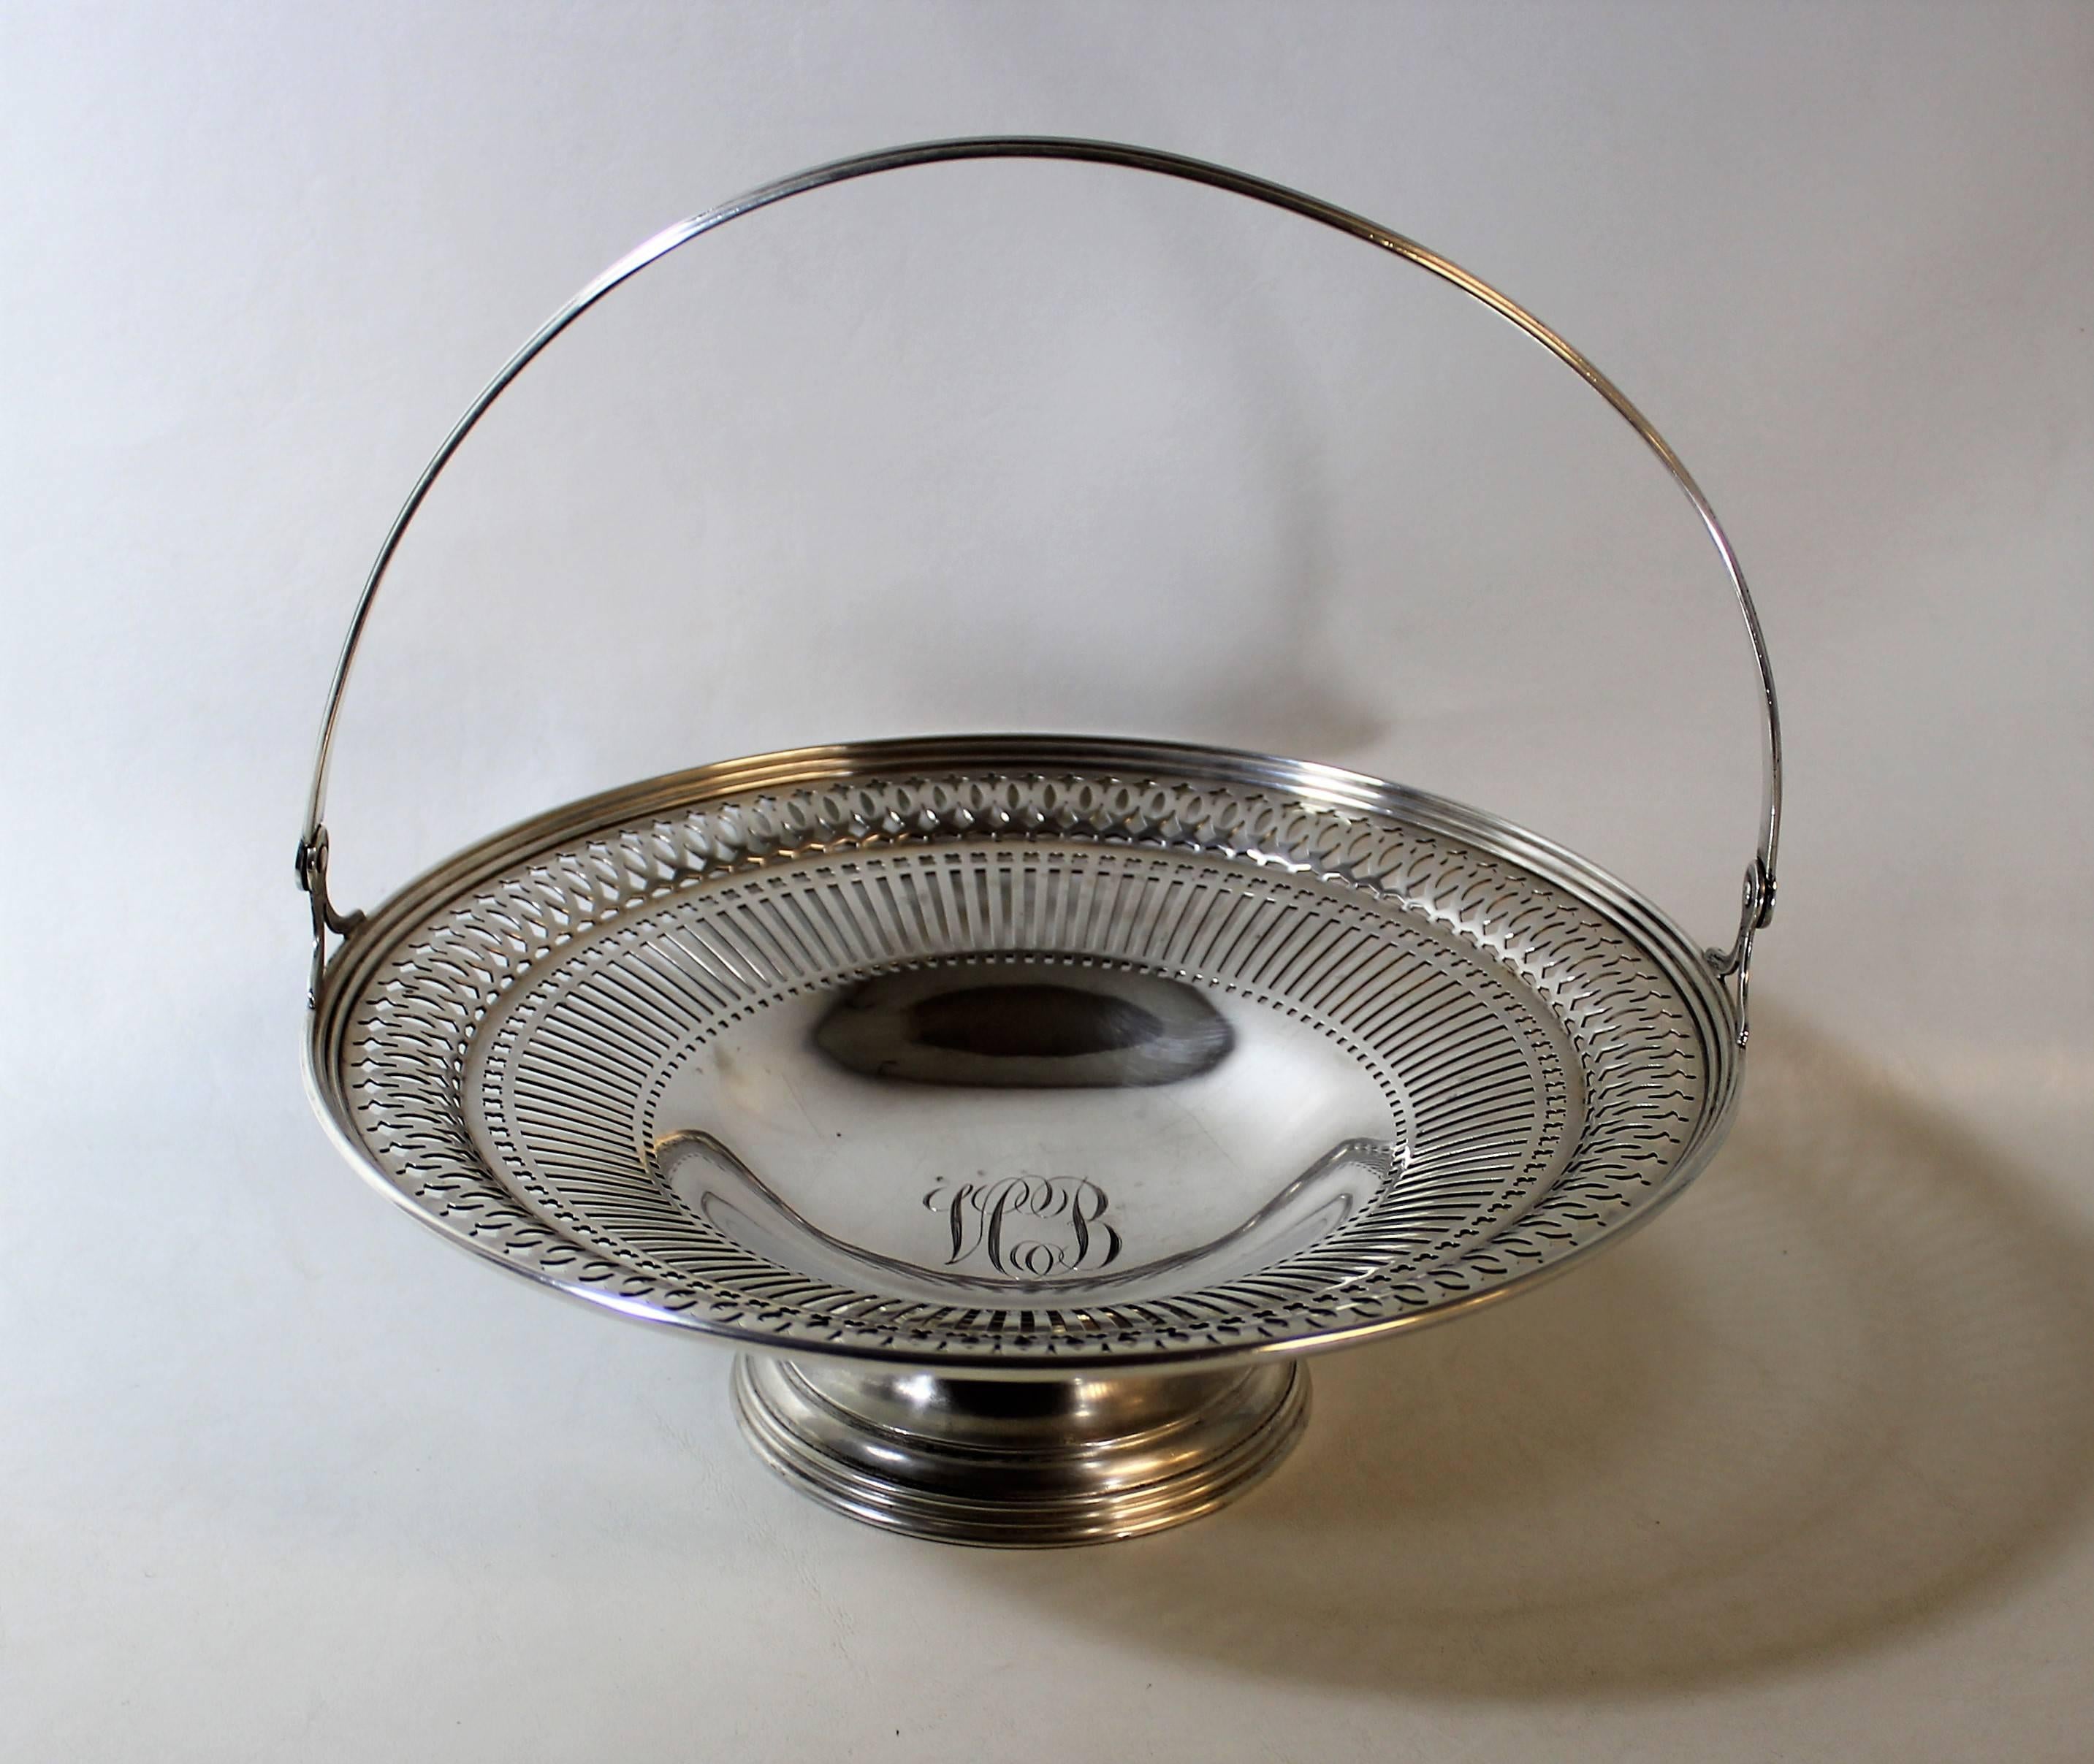 Birks sterling silver serving bowl with handle. Weight: 490 grams.